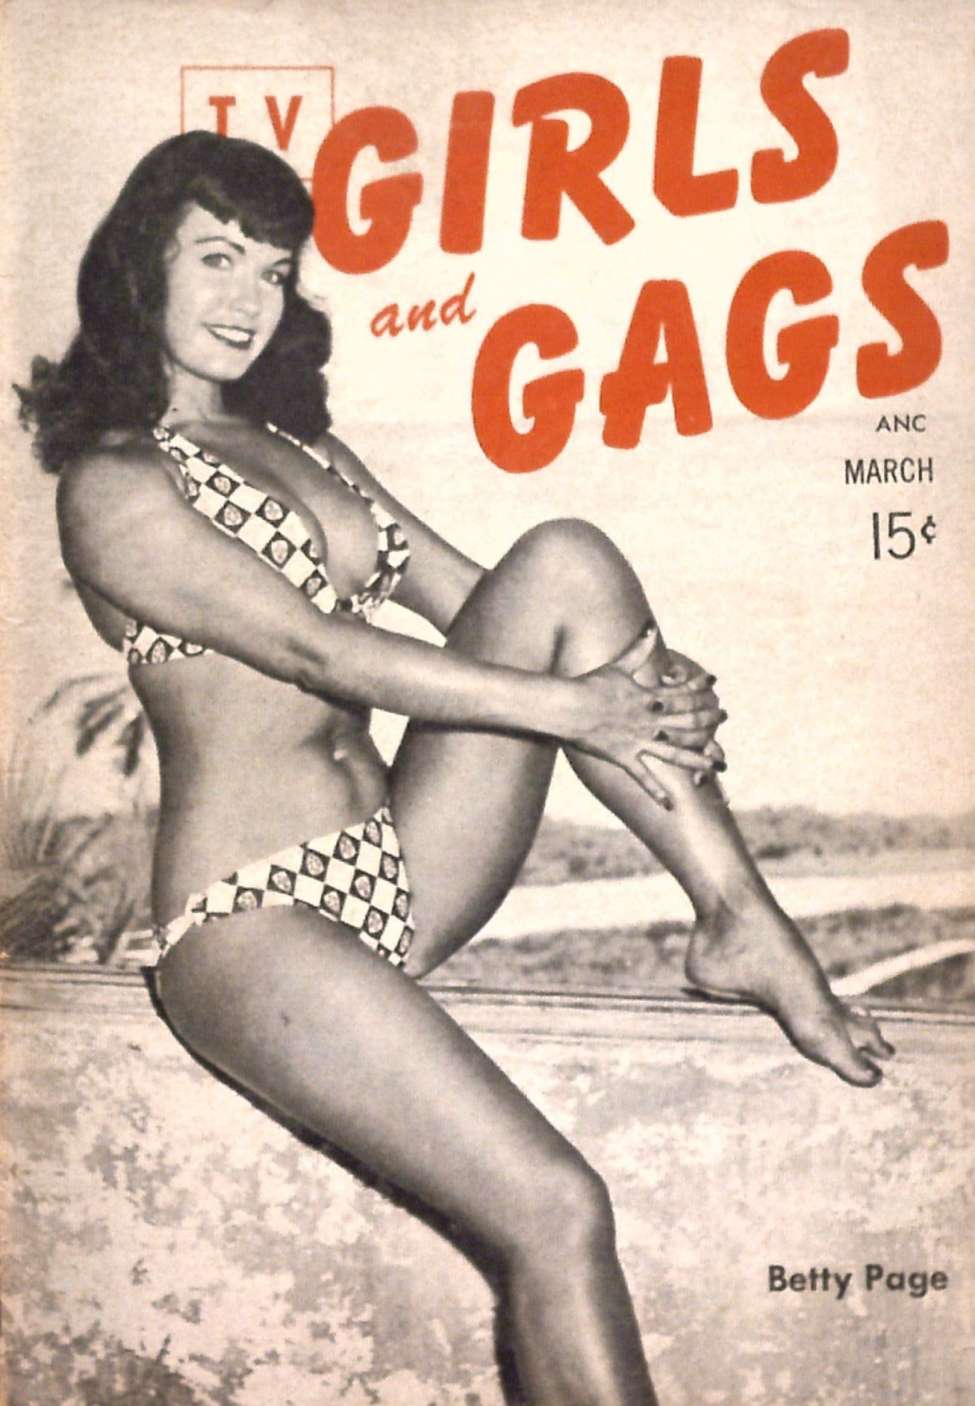 Book Cover For TV Girls and Gags v1 5